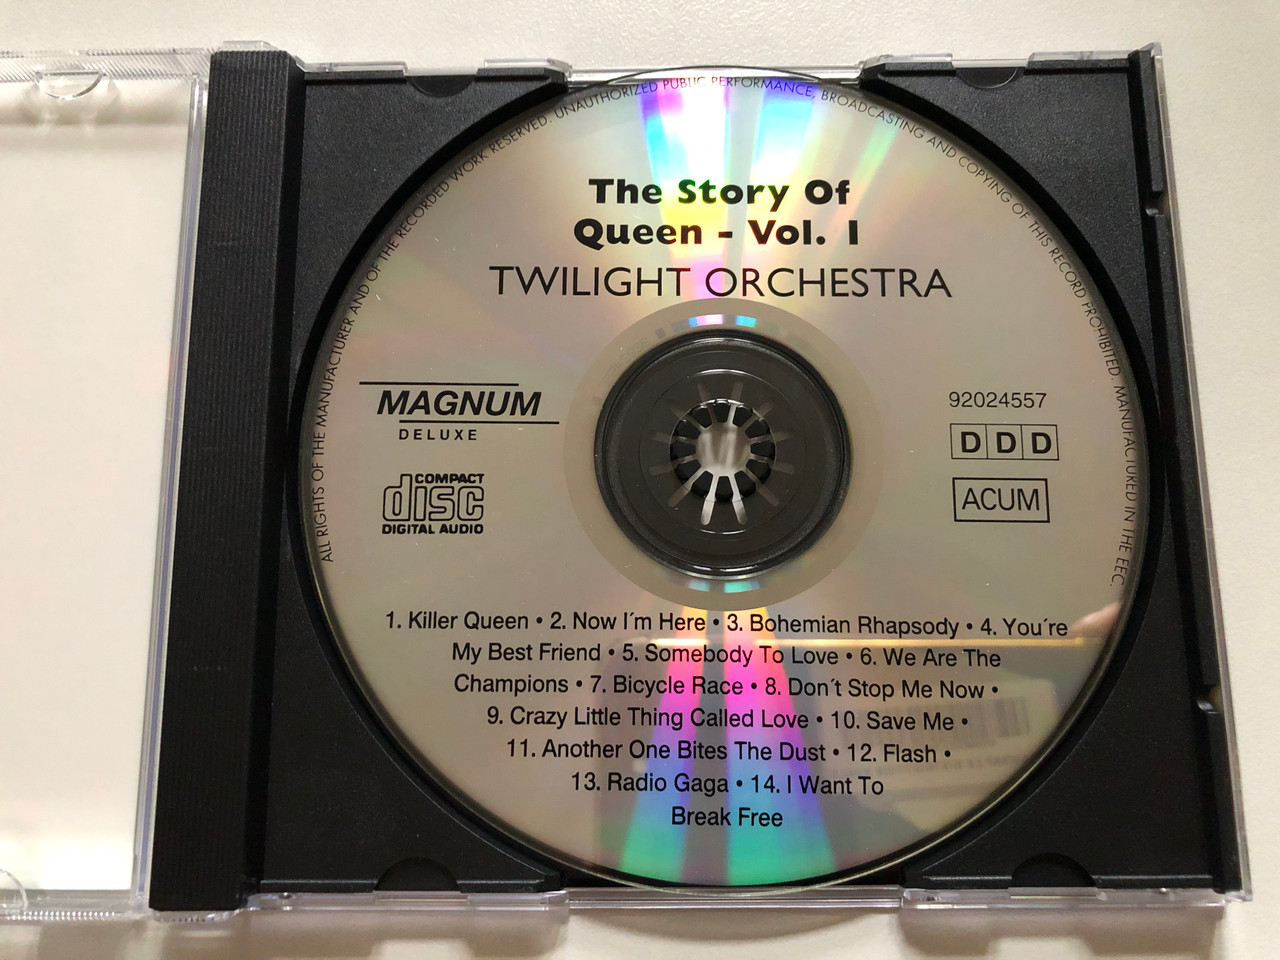 https://cdn10.bigcommerce.com/s-62bdpkt7pb/products/0/images/309924/Queen_-_The_Story_Volume_One_-_Played_By_London_Twilight_Orchestra_Magnum_Deluxe_Audio_CD_92024557_2__92497.1699298439.1280.1280.JPG?c=2